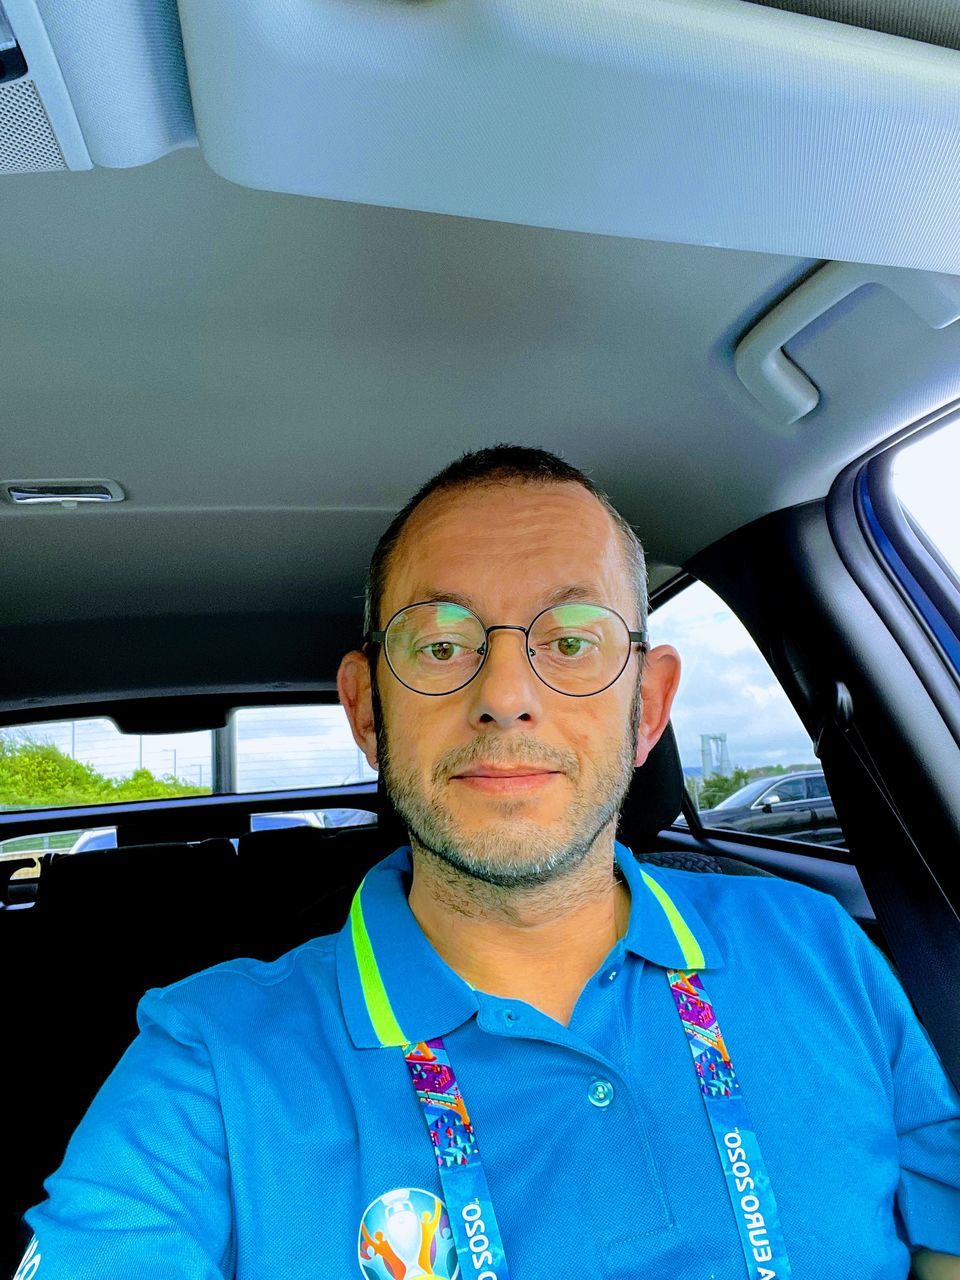 one person, adult, transportation, portrait, mode of transportation, men, motor vehicle, headshot, car, person, vehicle interior, mature adult, glasses, front view, looking at camera, eyeglasses, vehicle, travel, car interior, indoors, beard, facial hair, clothing, sitting, emotion, smiling, serious, driving, journey, seat belt, day